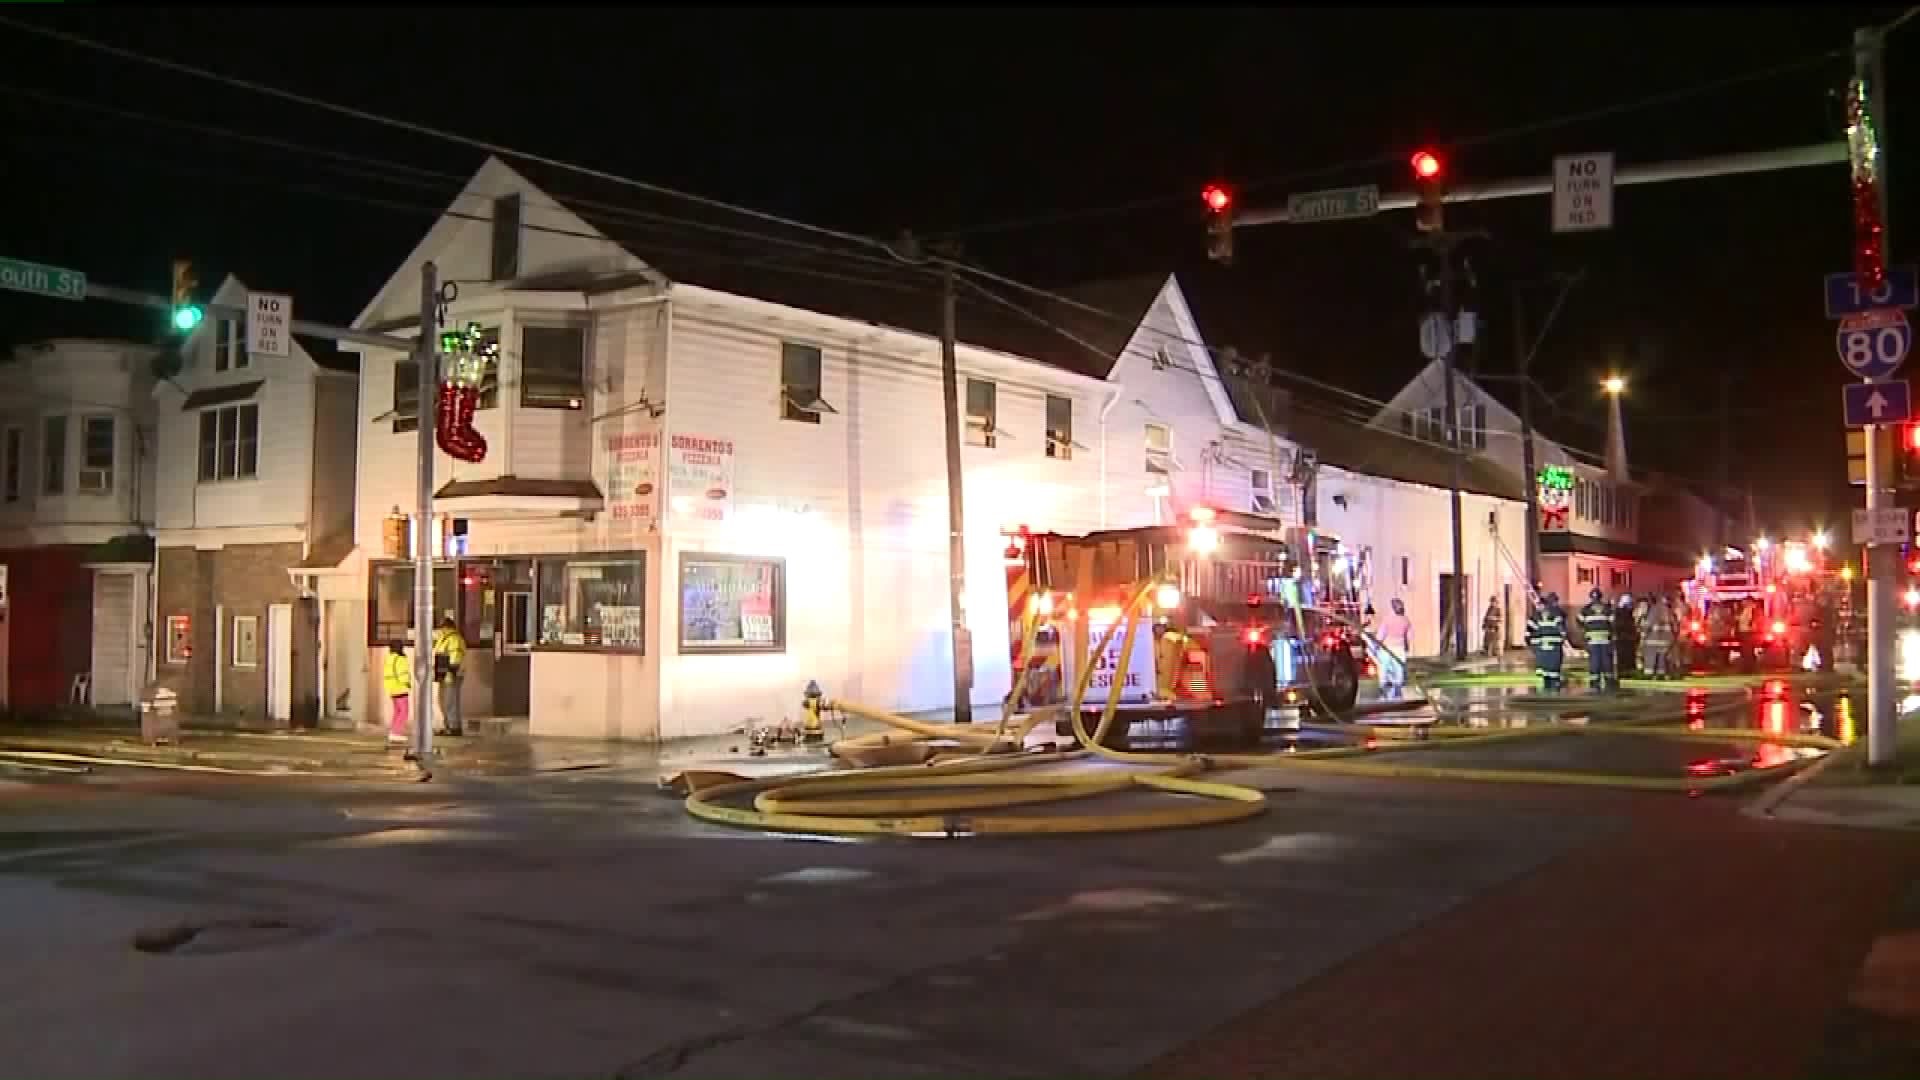 Restitution Included in Sentence After Fire Destroyed Pizza Shop, Apartment